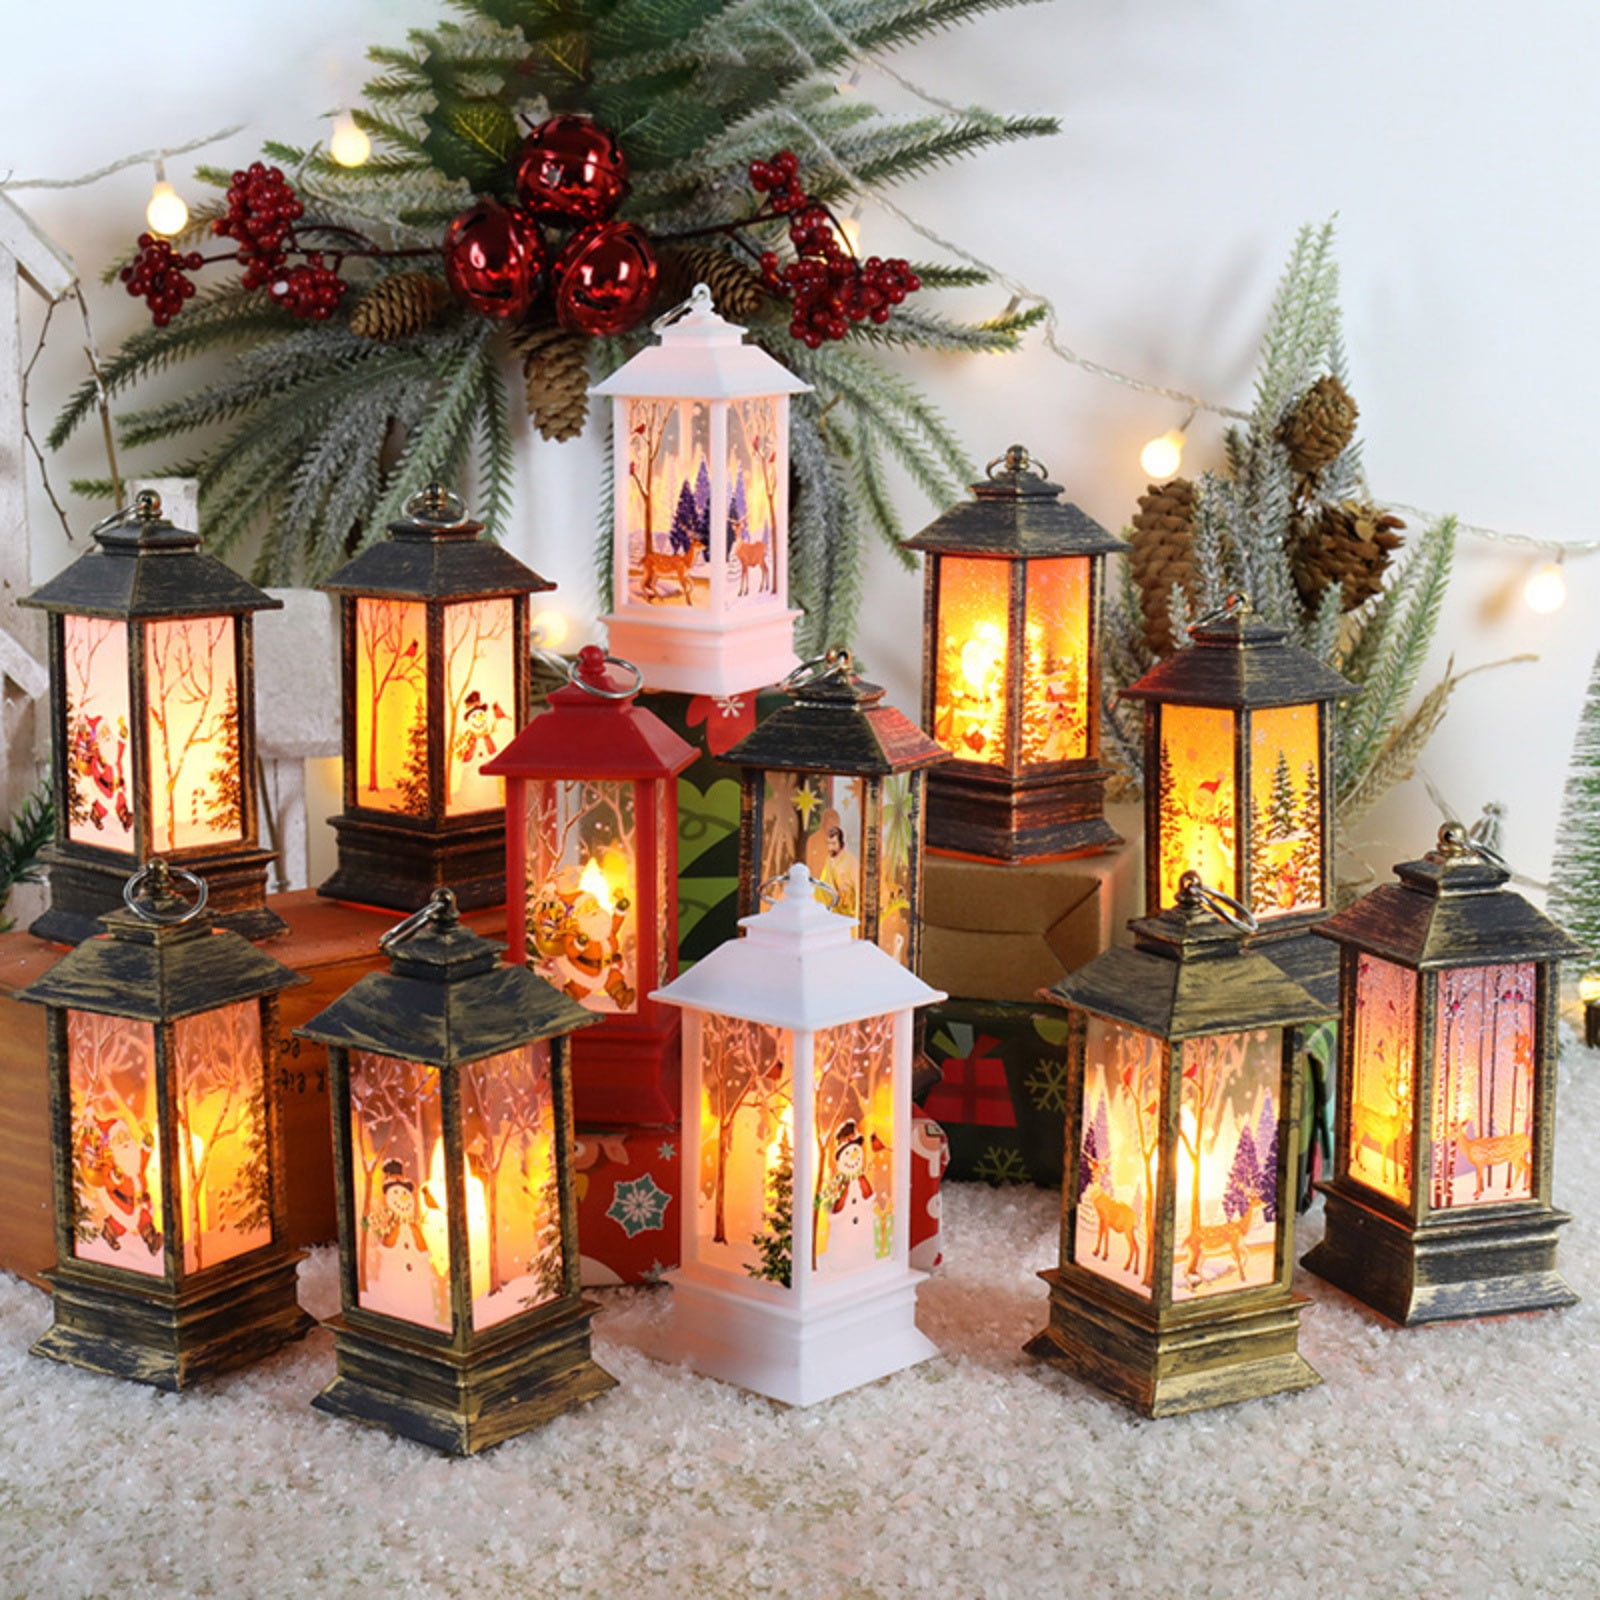 Decorative Candle Lanterns Flameless Battery-Operated with Timer Function,  Christmas Gifts, Holiday Lights,10'' Indoor Outdoor Waterproof Hanging